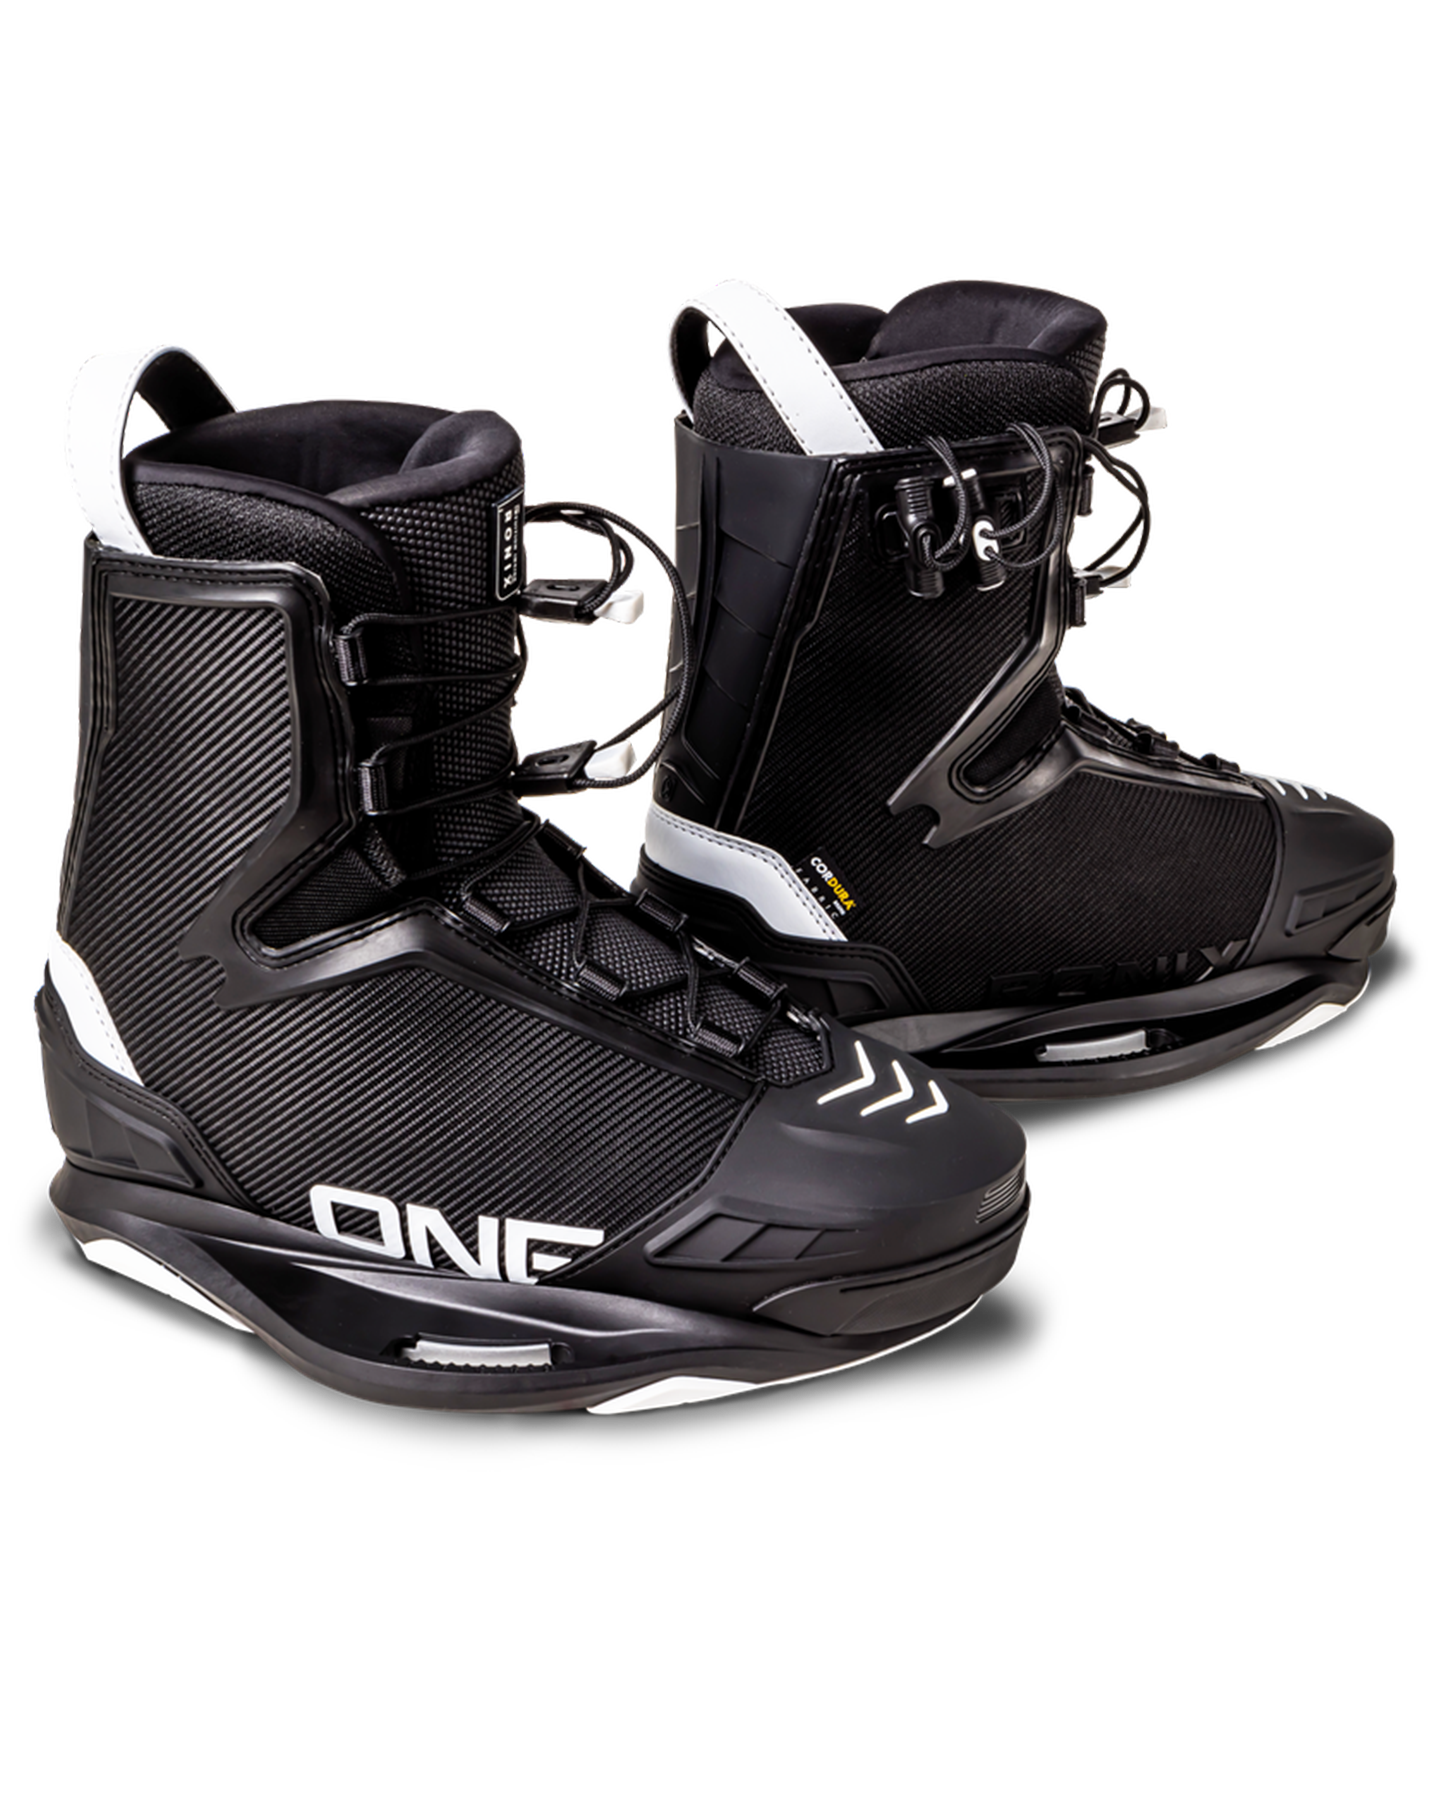 Ronix One Legacy Wakeboard with One Boots Wakeboard Packages - Mens - Trojan Wake Ski Snow